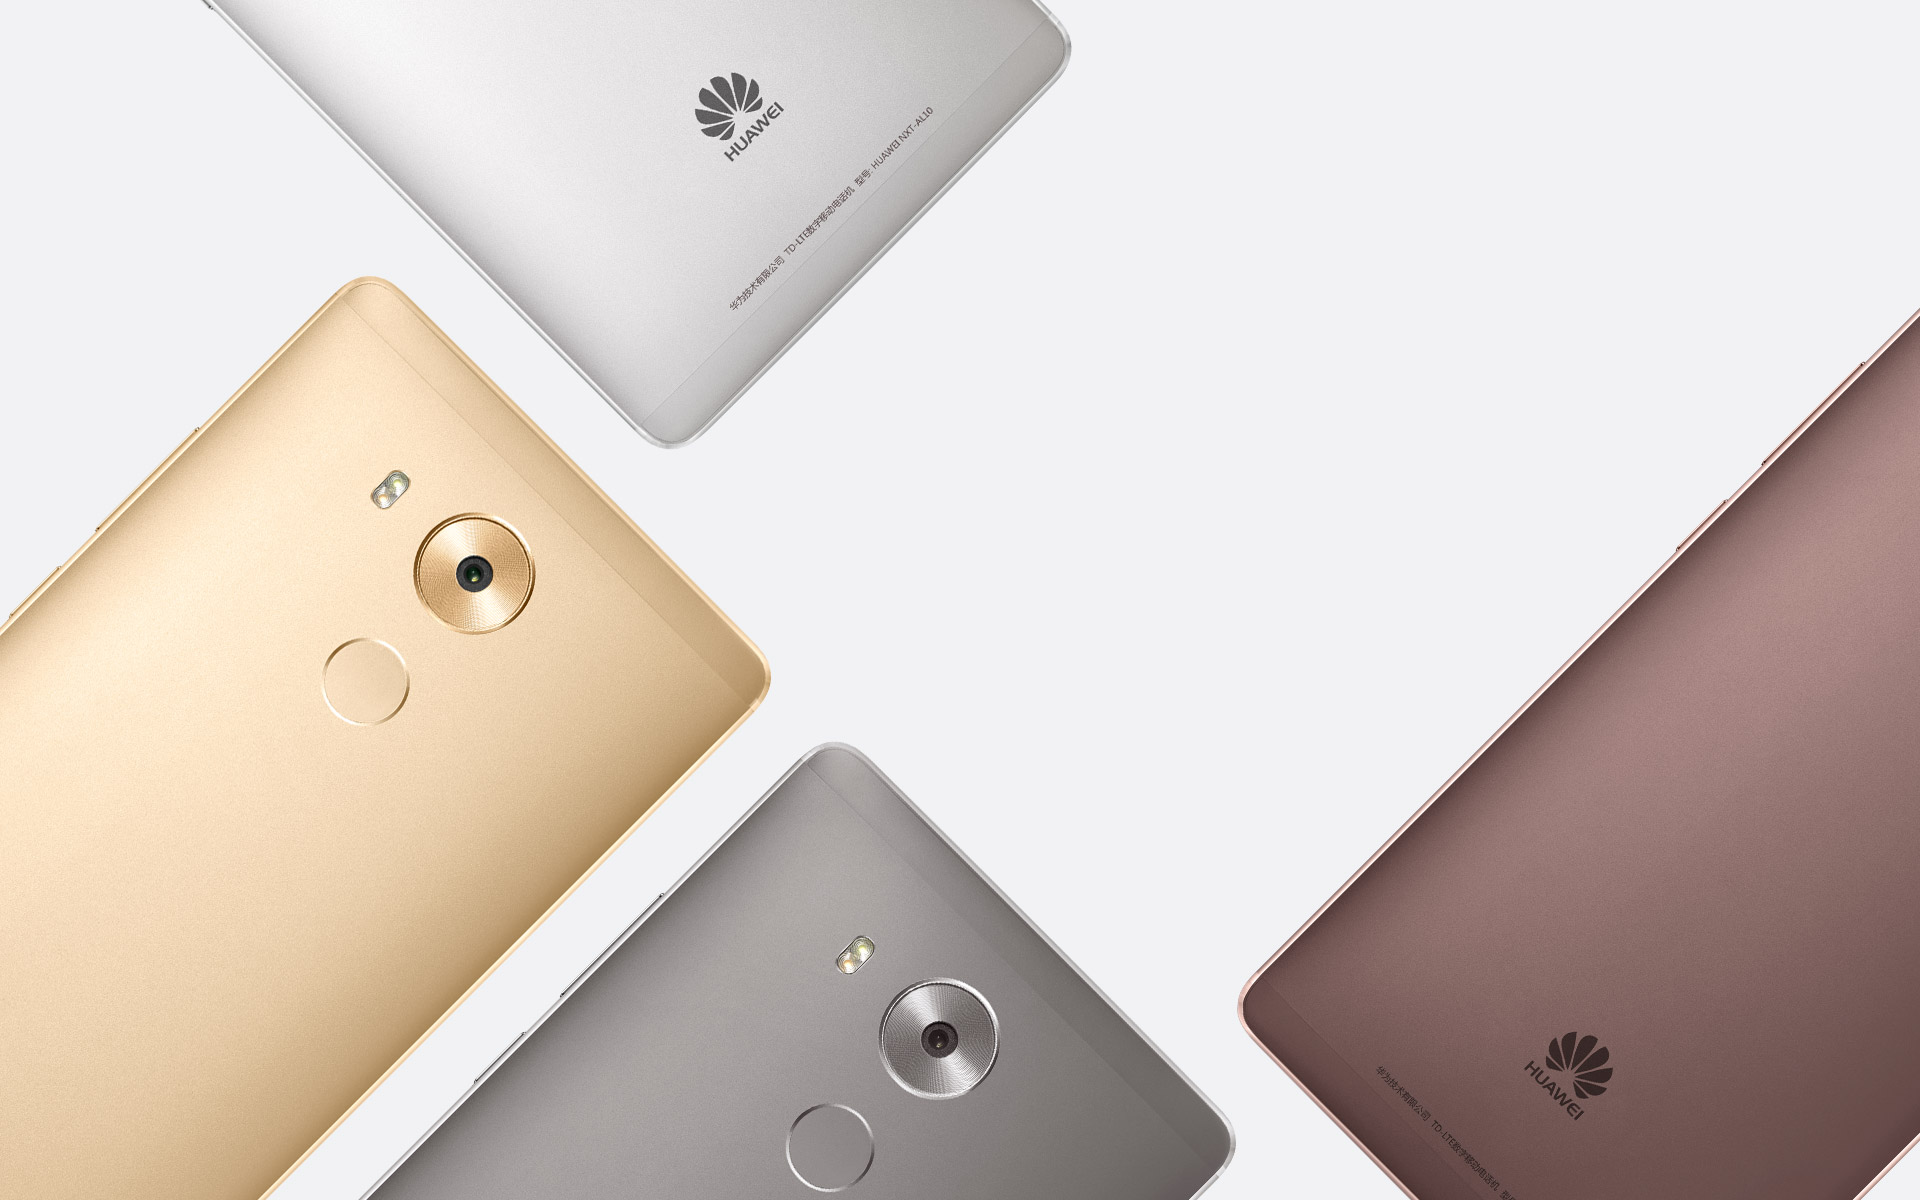 Huawei-Mate-8-official-images-2